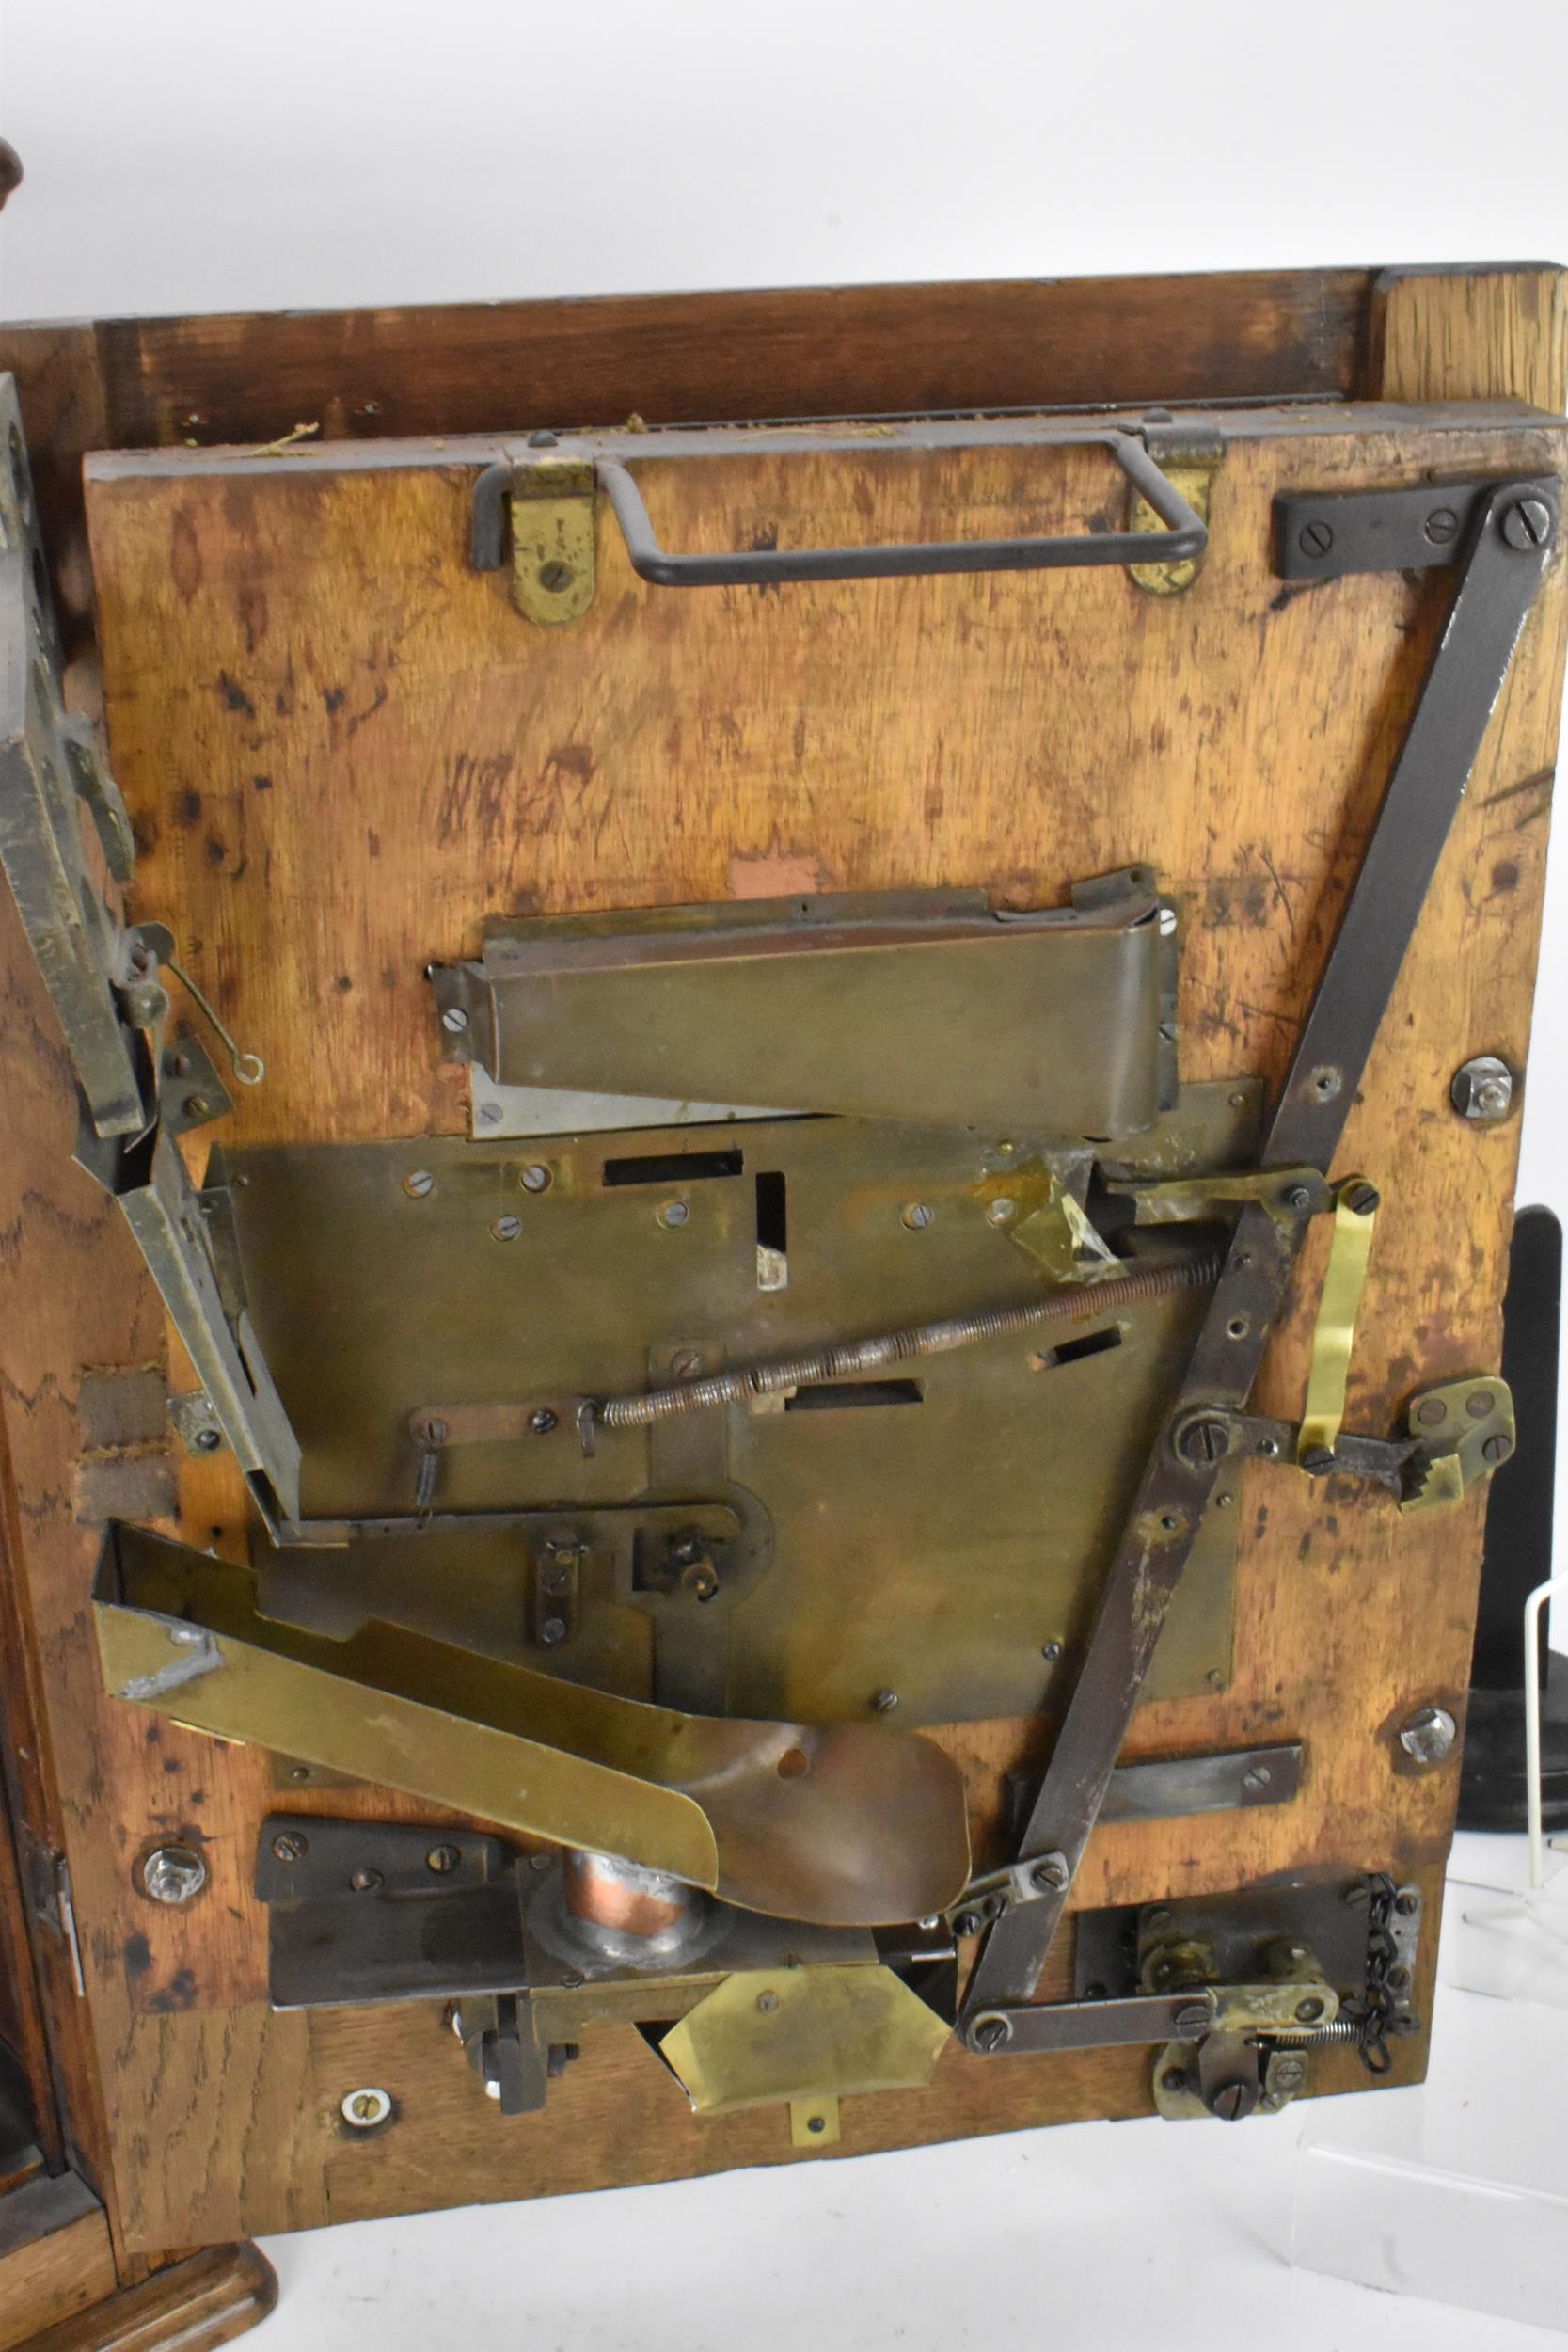 An Allwin De Luxe oak cased penny slot machine, circa 1920, with internal metal ball track, - Image 6 of 12